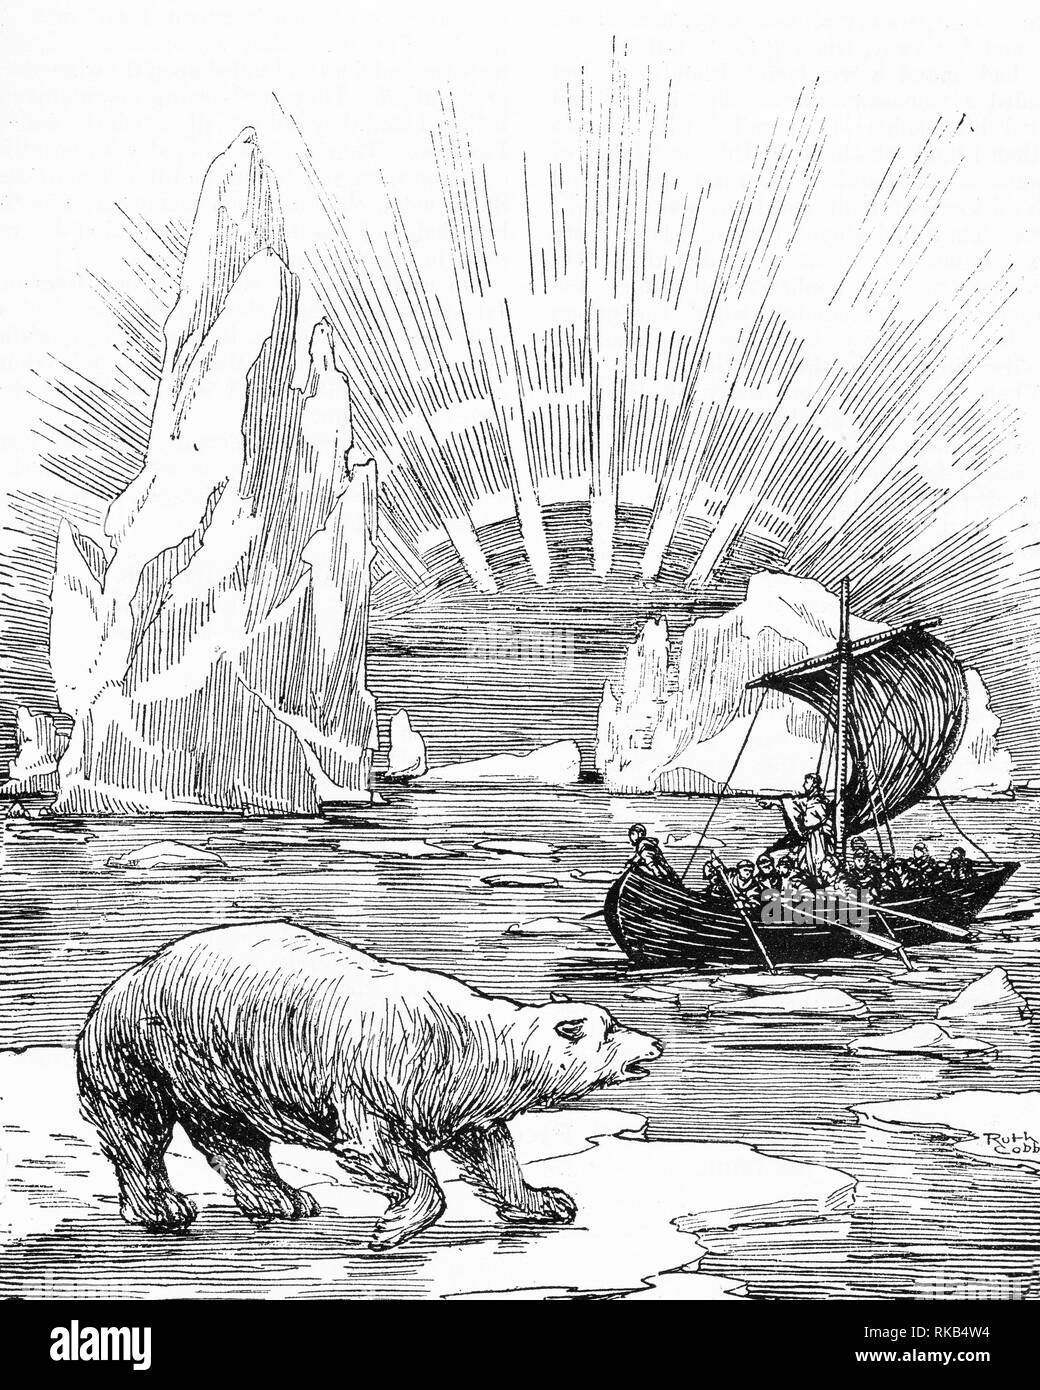 Engraving of vikings exploring the arctic. From Chatterbox magazine, 1925 Stock Photo